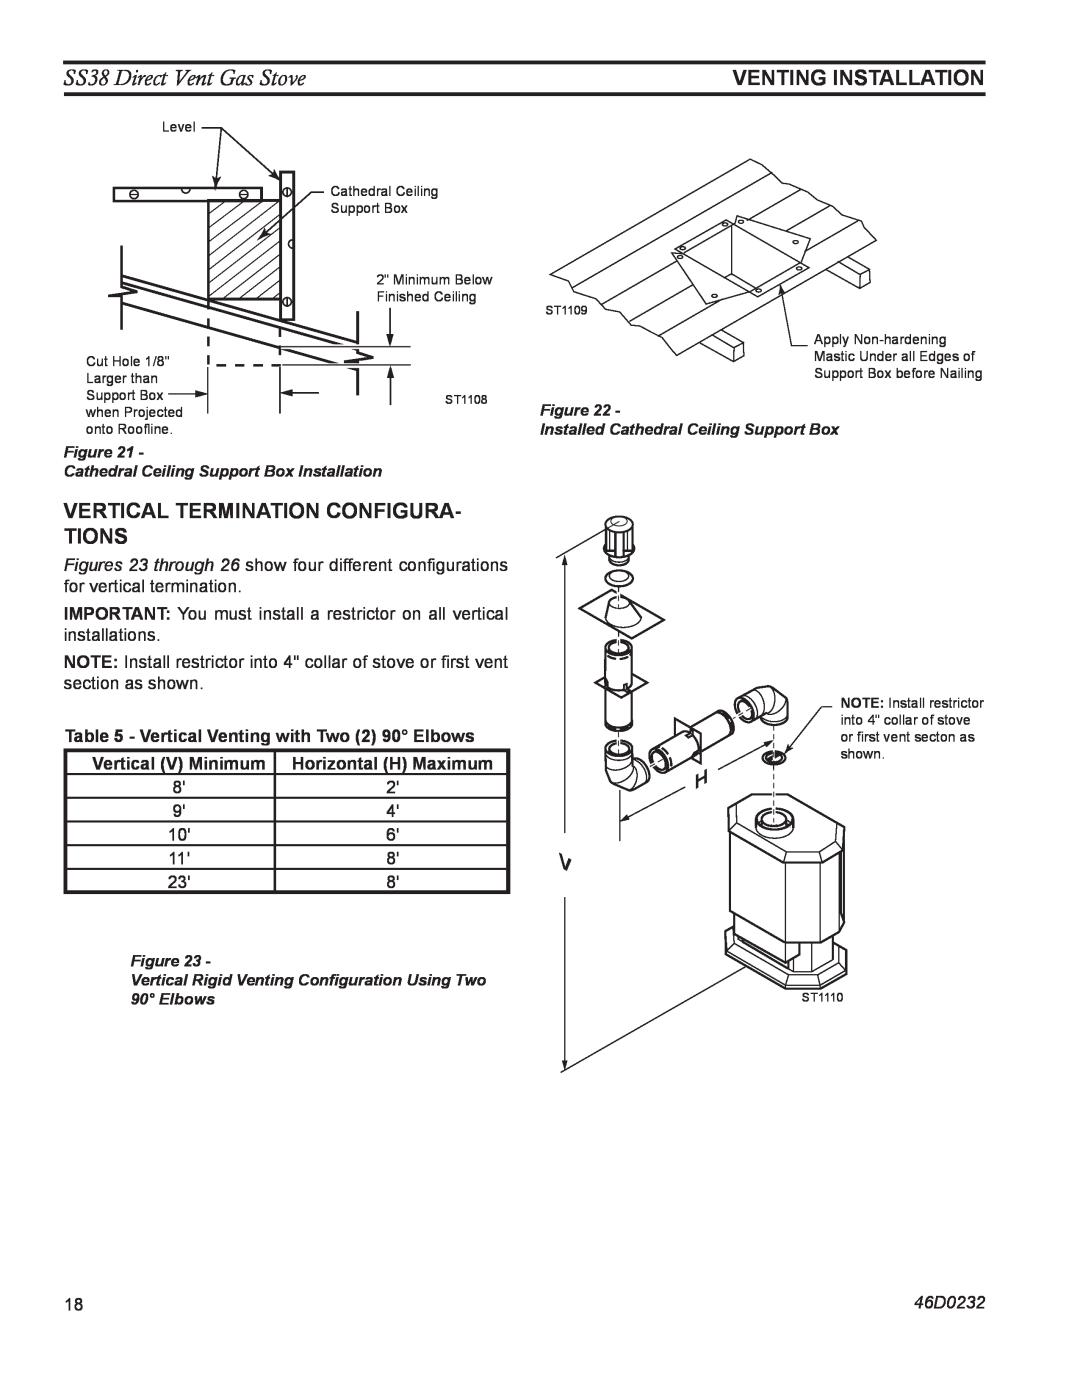 Monessen Hearth operating instructions Vertical Termination Configura- Tions, SS38 Direct Vent Gas Stove, 46D0232 